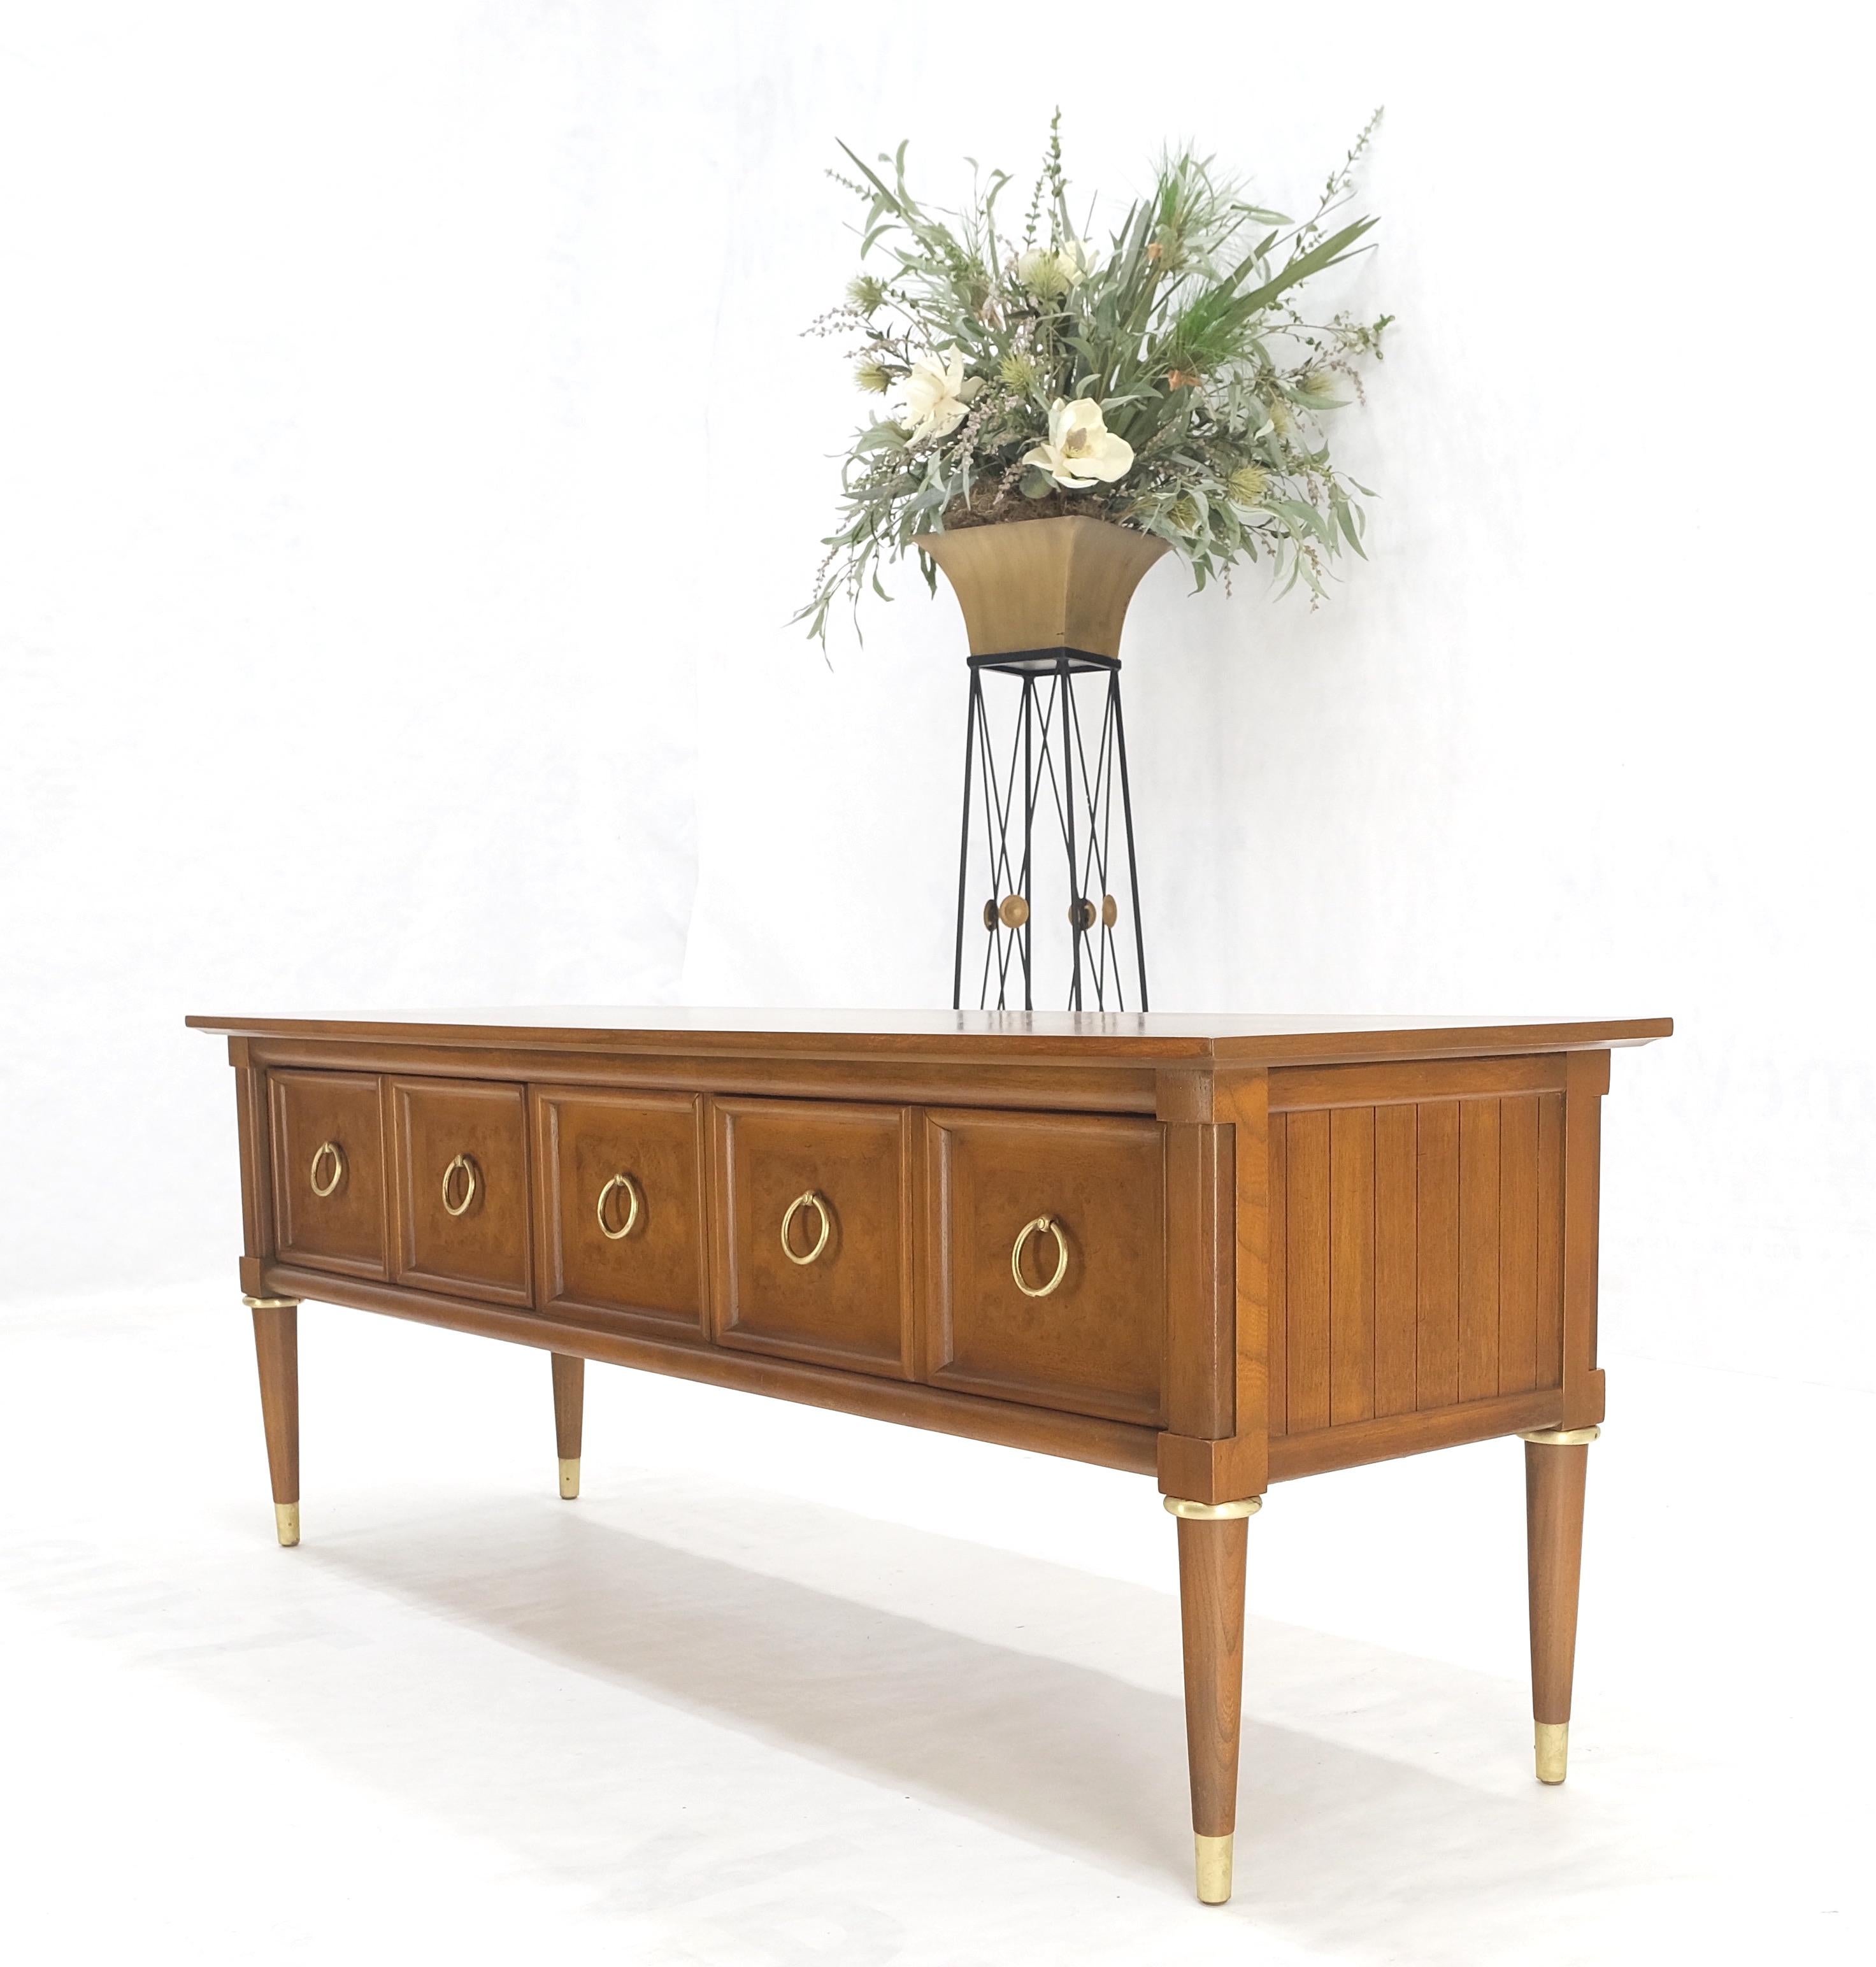 Light Walnut Messing Drop Rings Pulls Low Profile Tapered Legs Long Credenza Mid Century MINT!